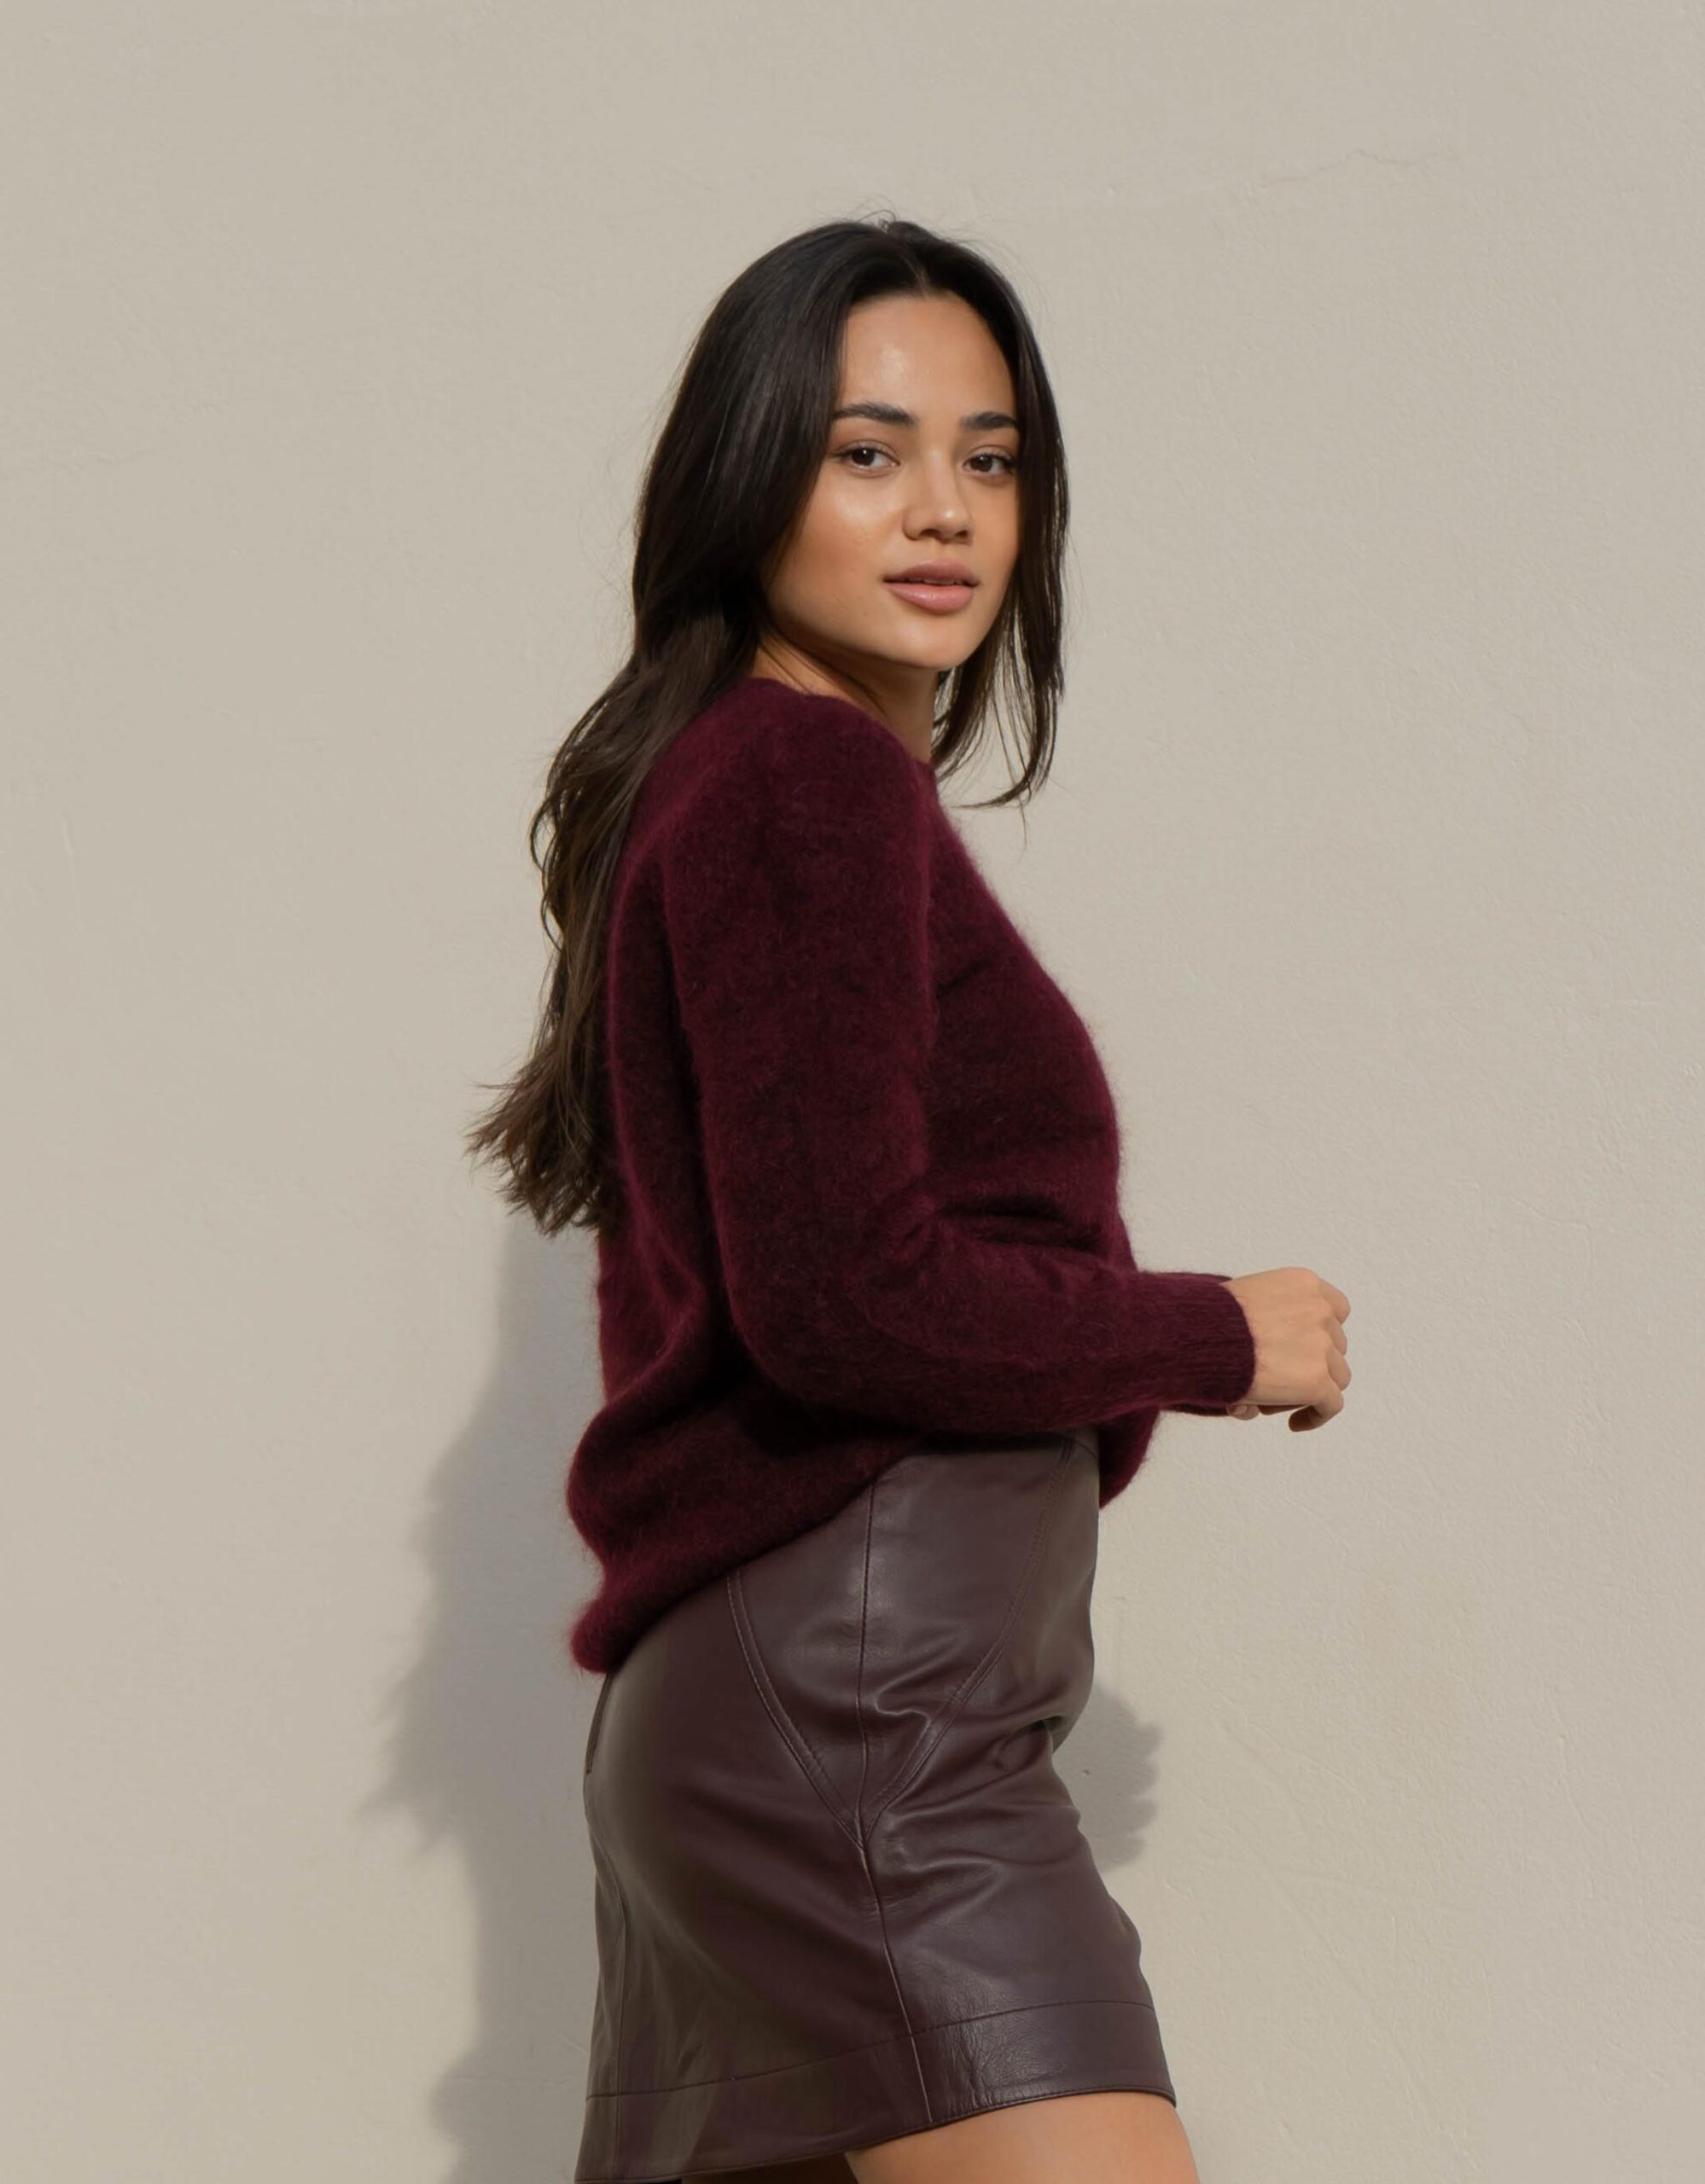 Leather A-line mini skirt, $199.95; Mohair crew neck sweater, $189.95; both Seed Heritage, available at Myer.